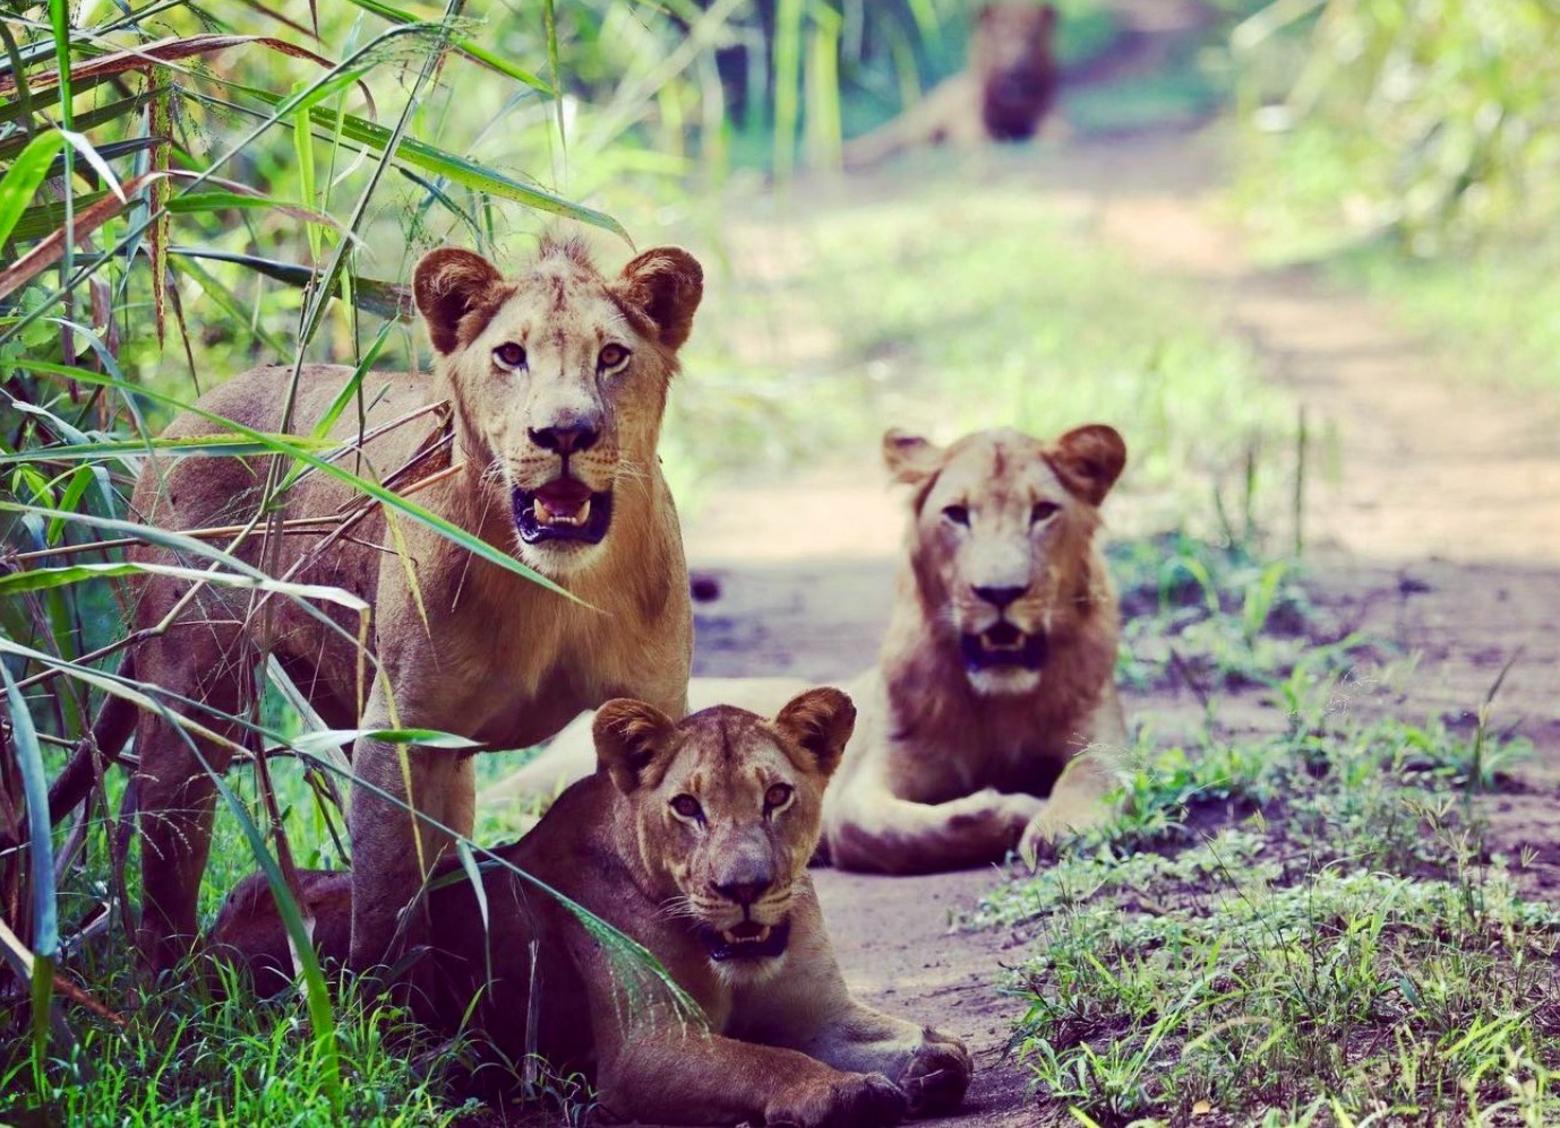 With better protection, community programs that build more tolerance among farmers and their livestock, and a growing nature-tourism economy, lion numbers in Gorongosa are again healthy. Photo courtesy Gorongosa National Park